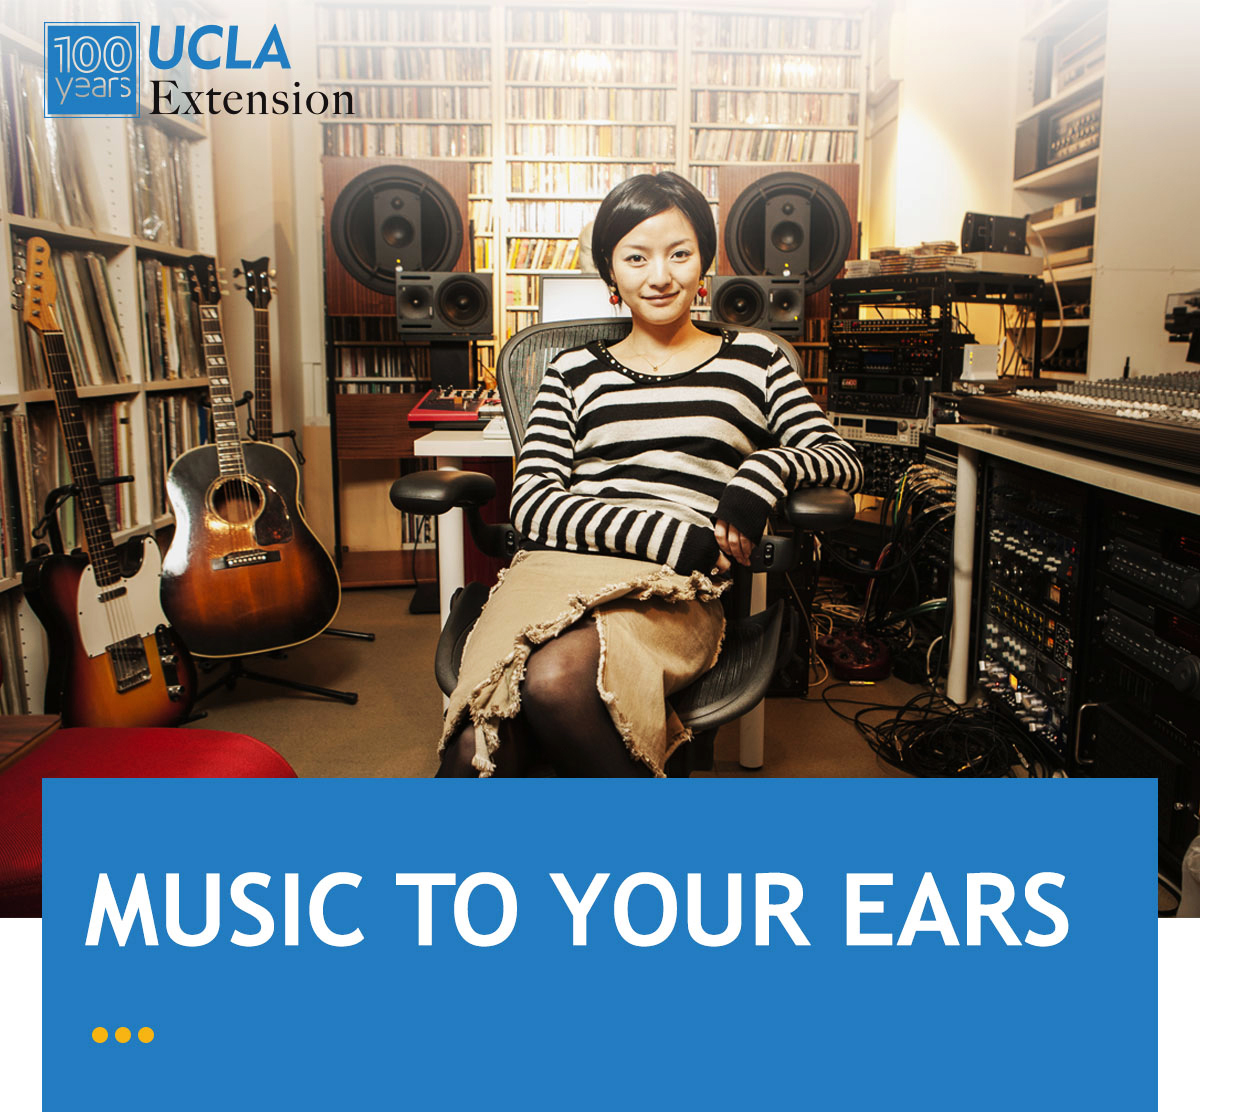 UCLA Extension email campaign with musician